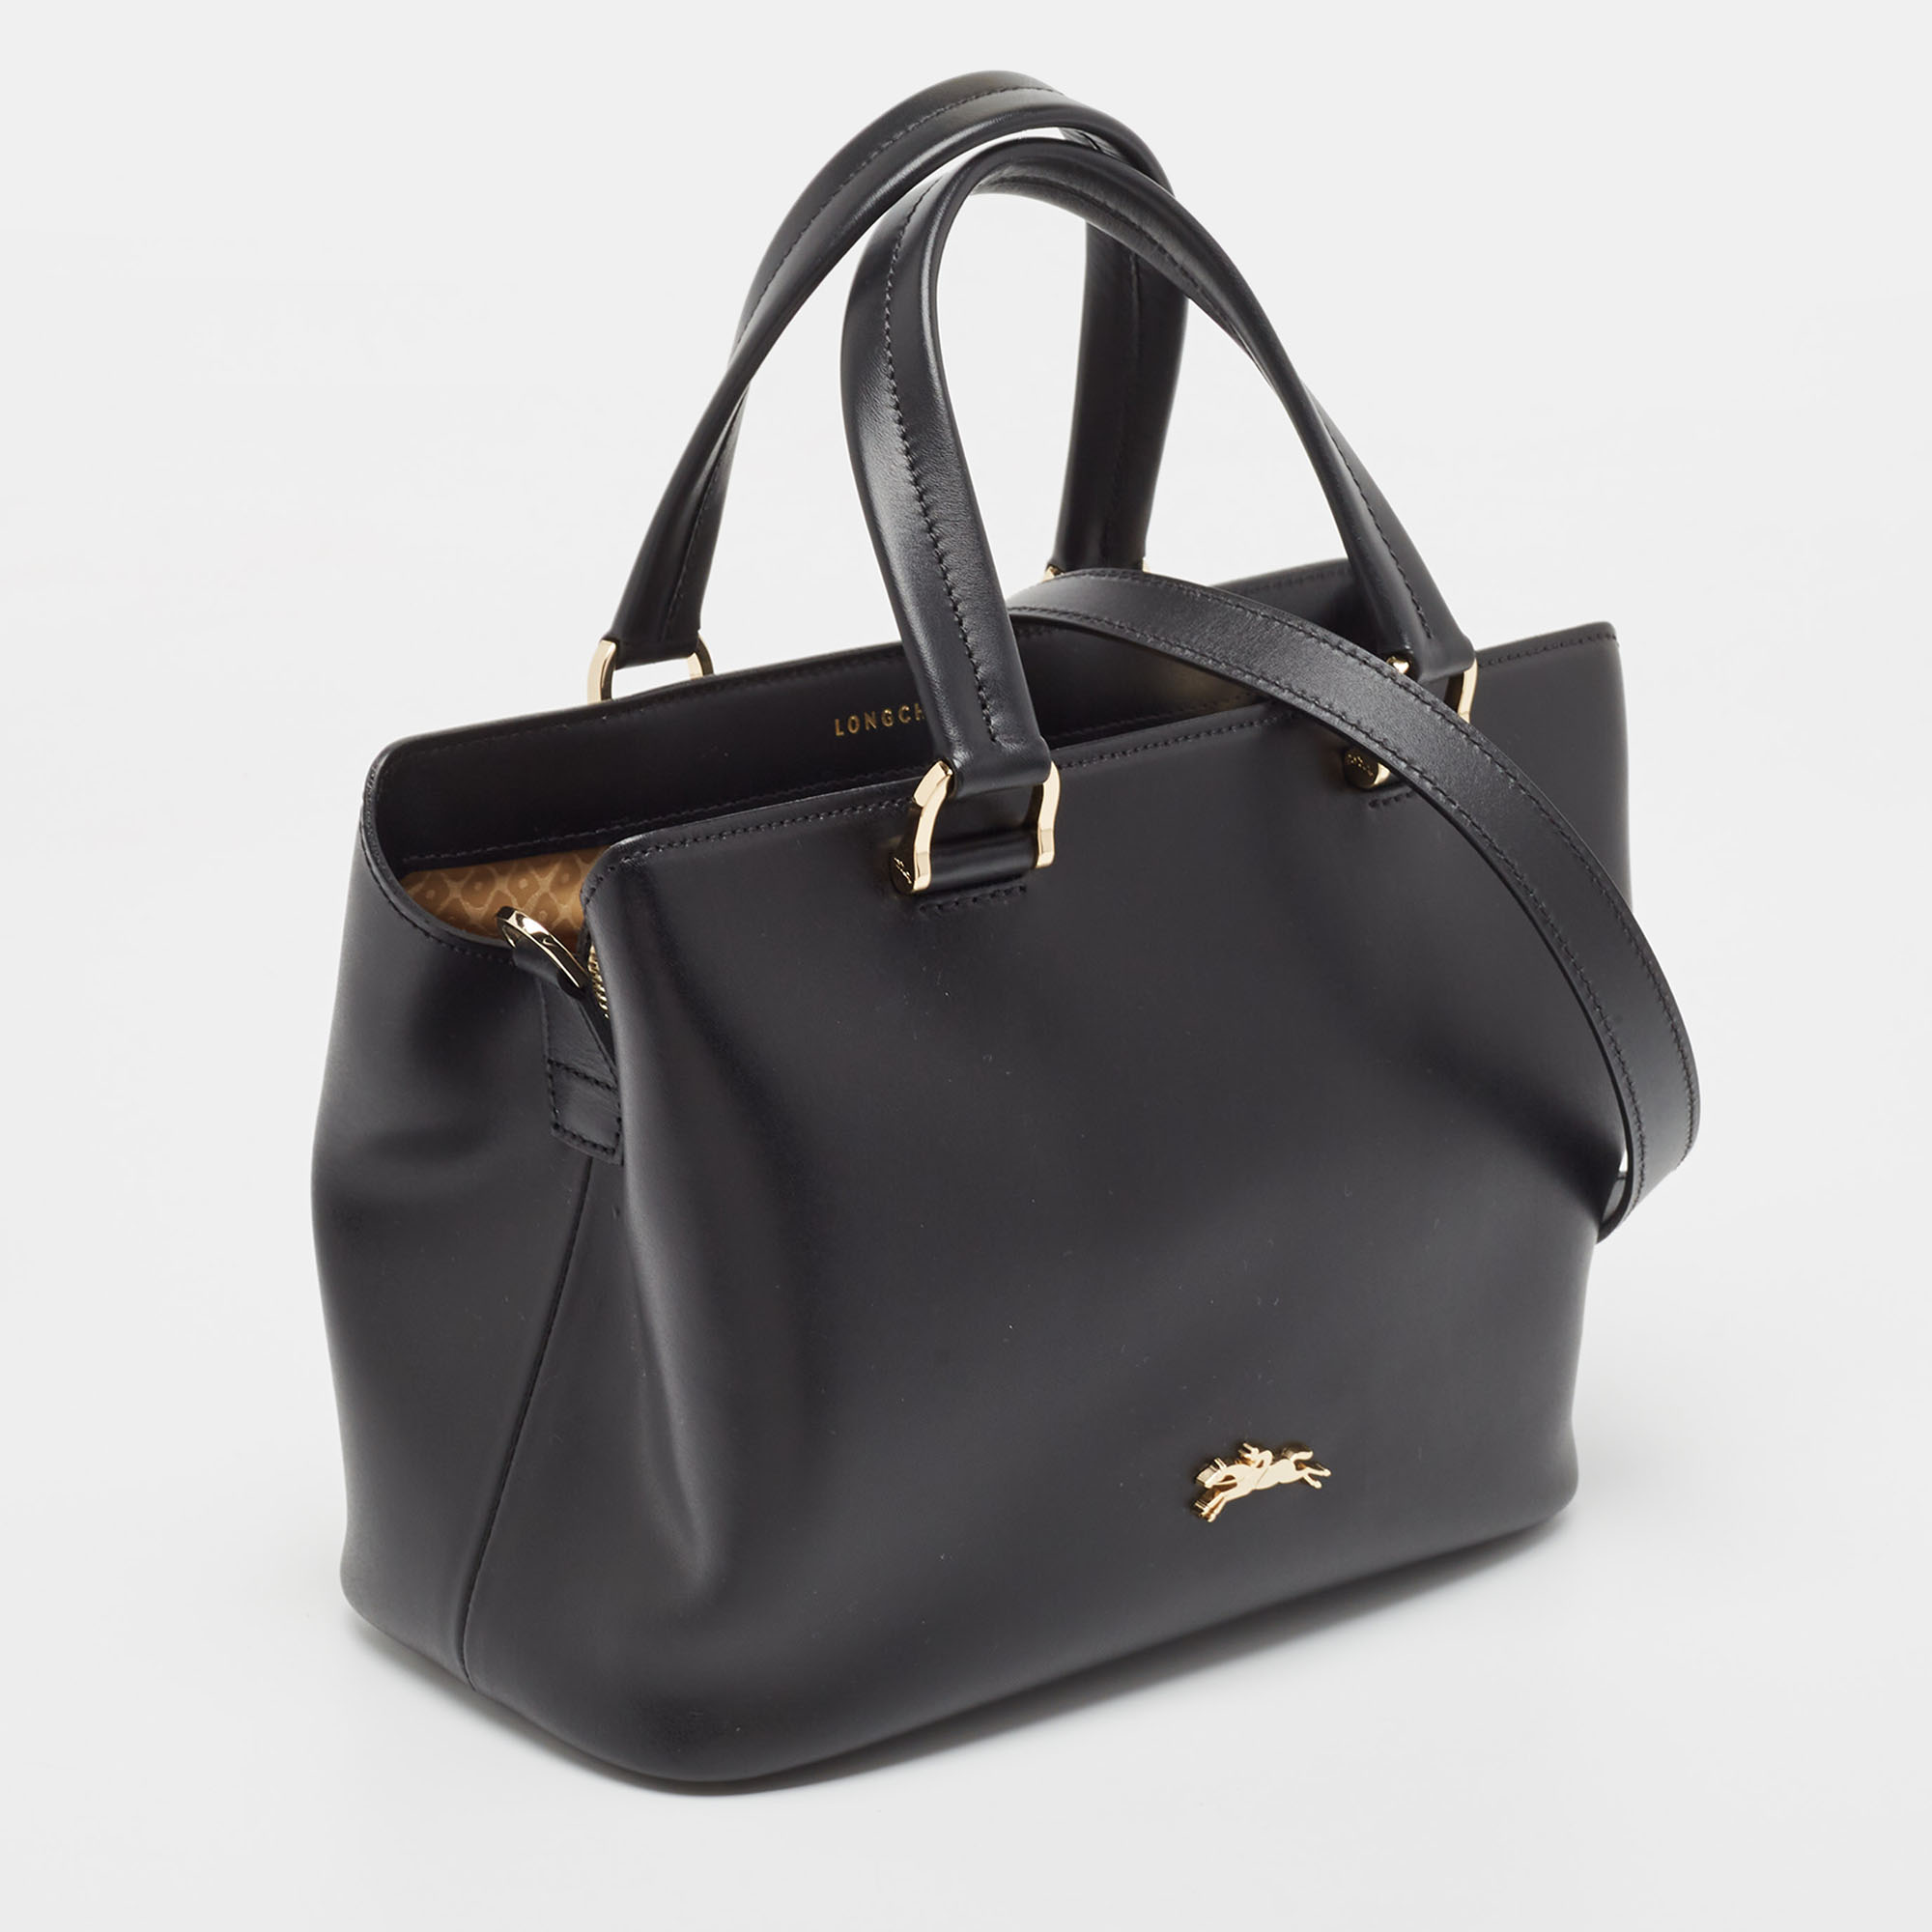 Longchamp Black Leather Honore Tote